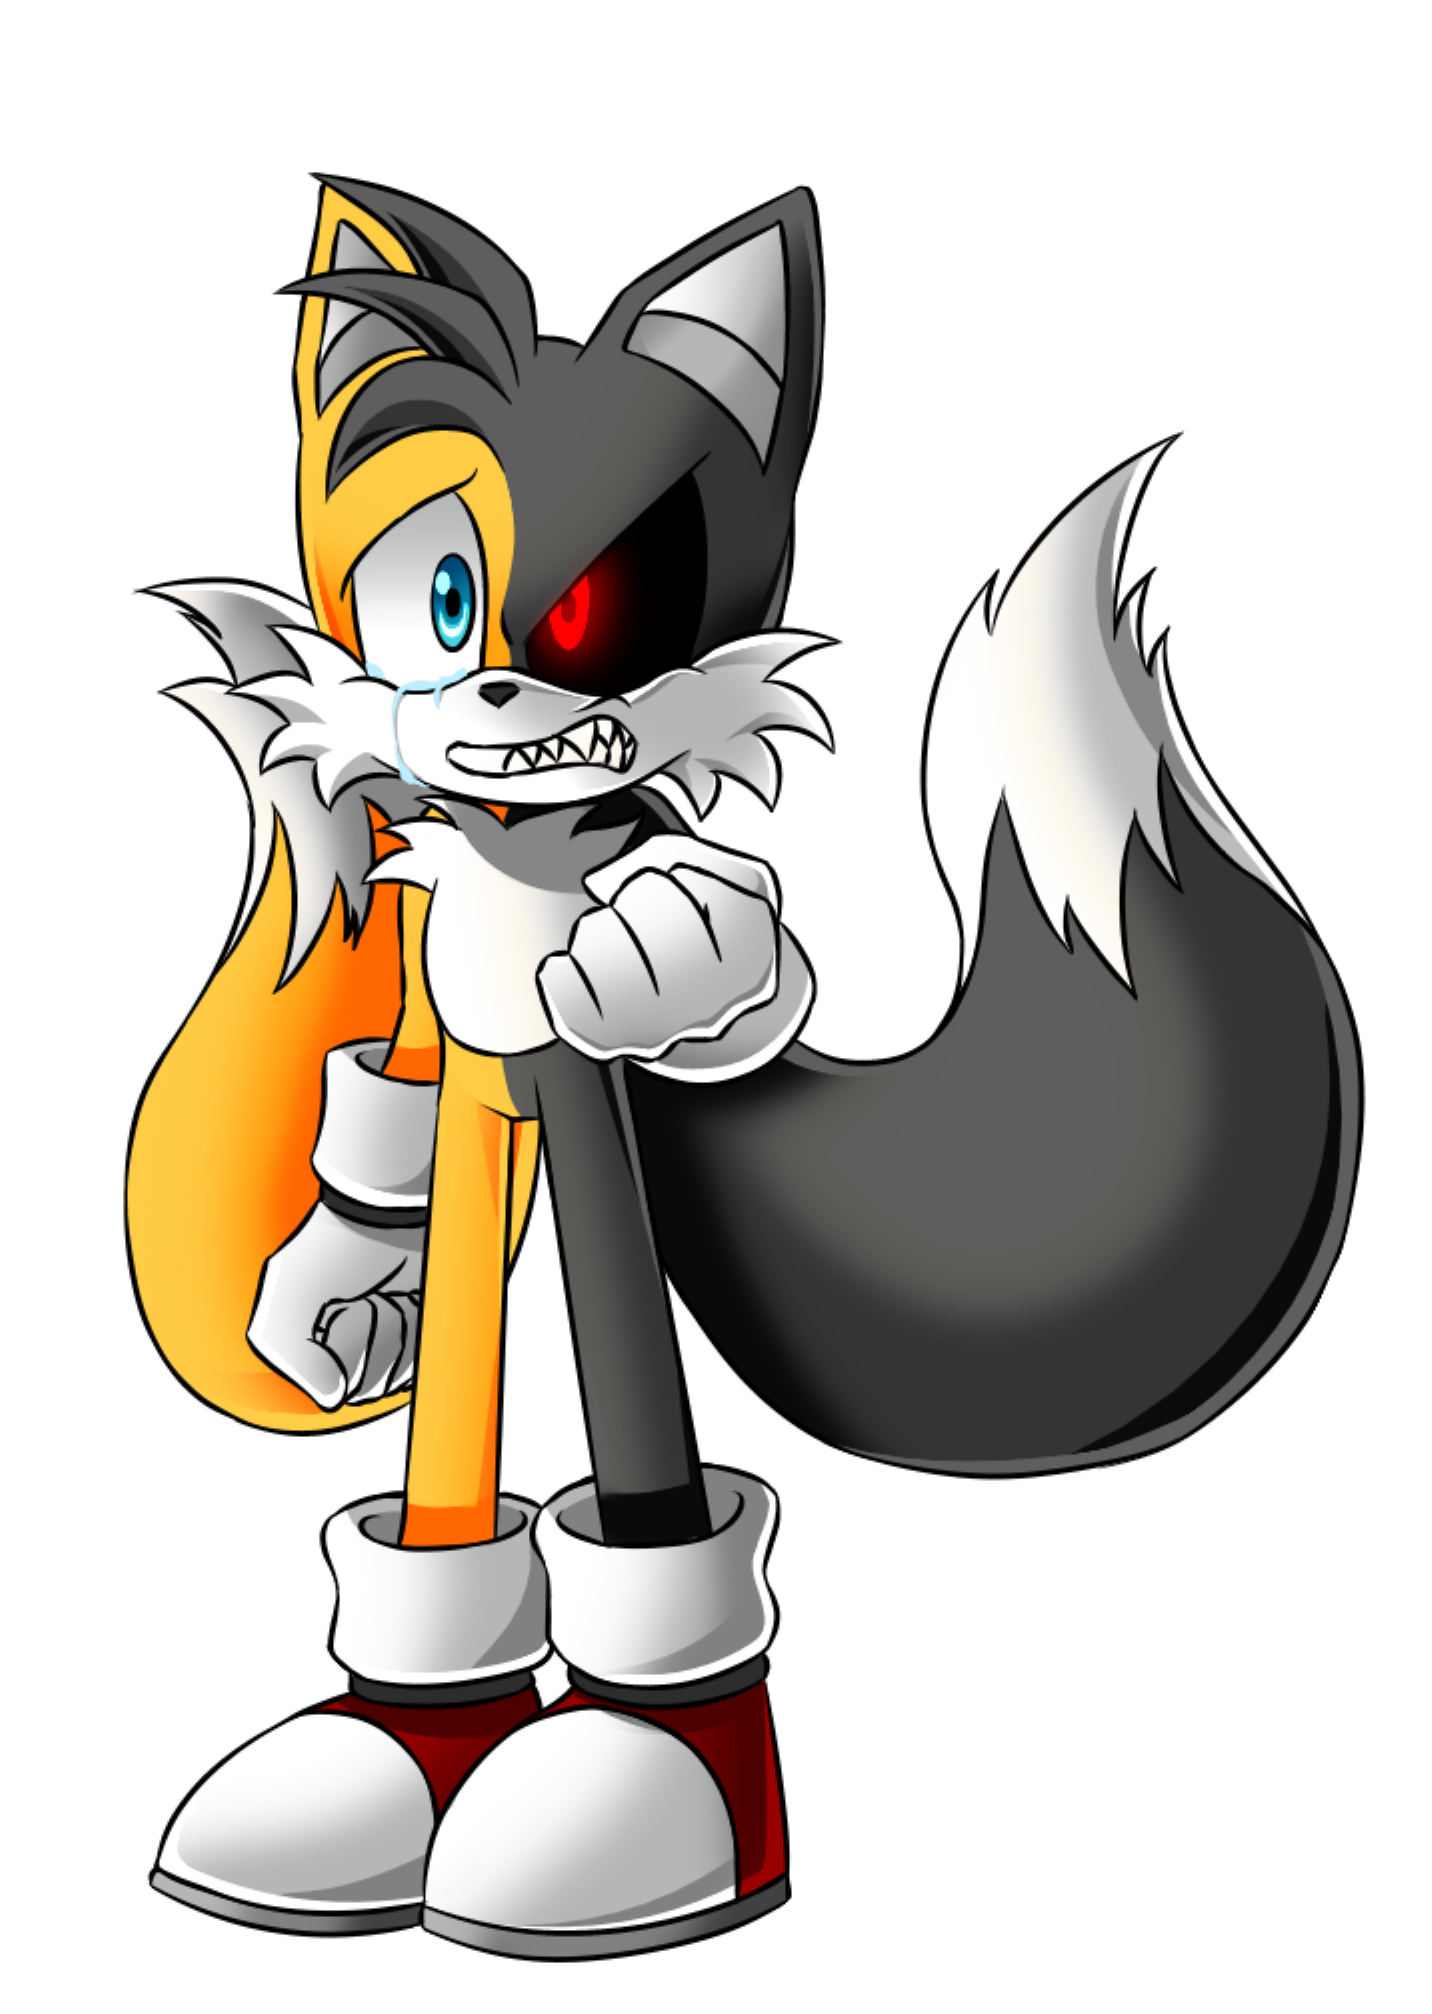 sonic project x evil tails